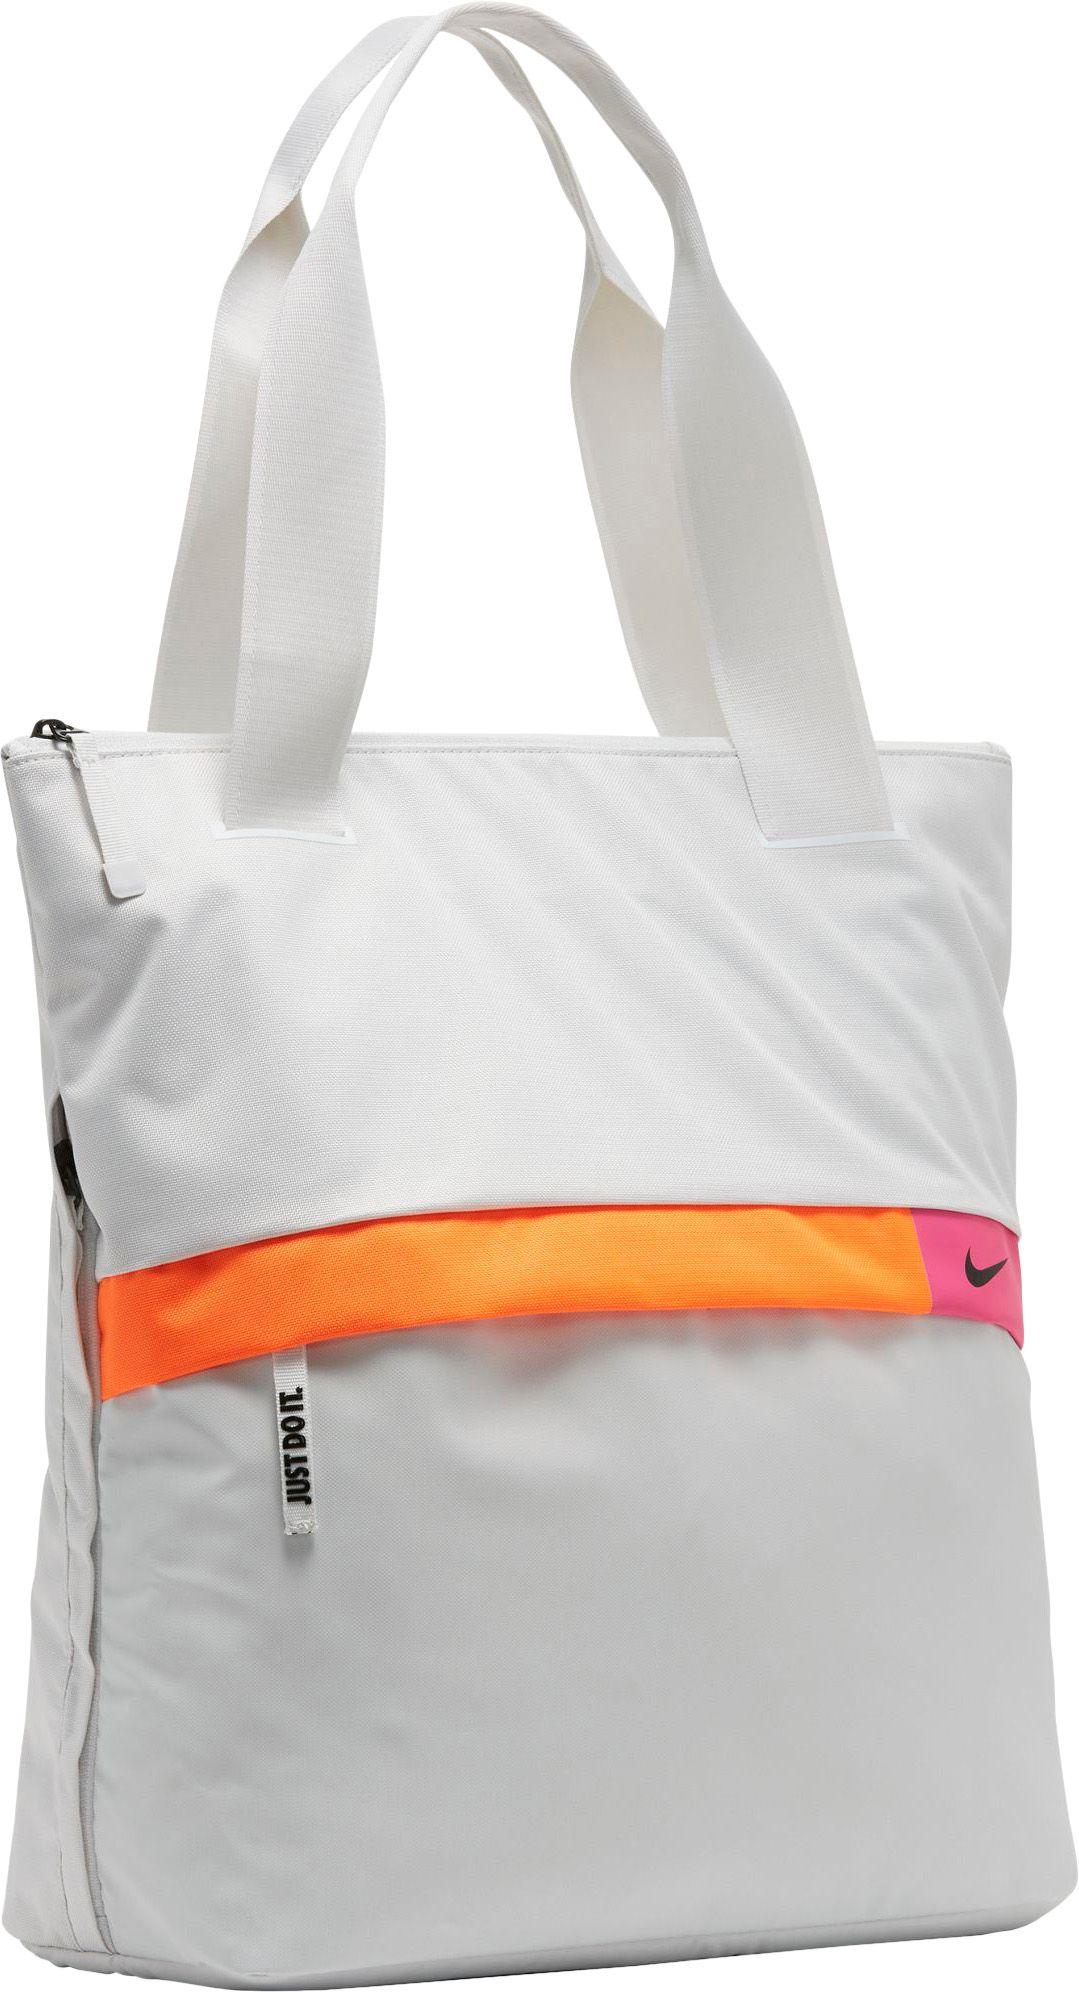 Nike Radiate Graphic Training Tote Bag in White | Lyst